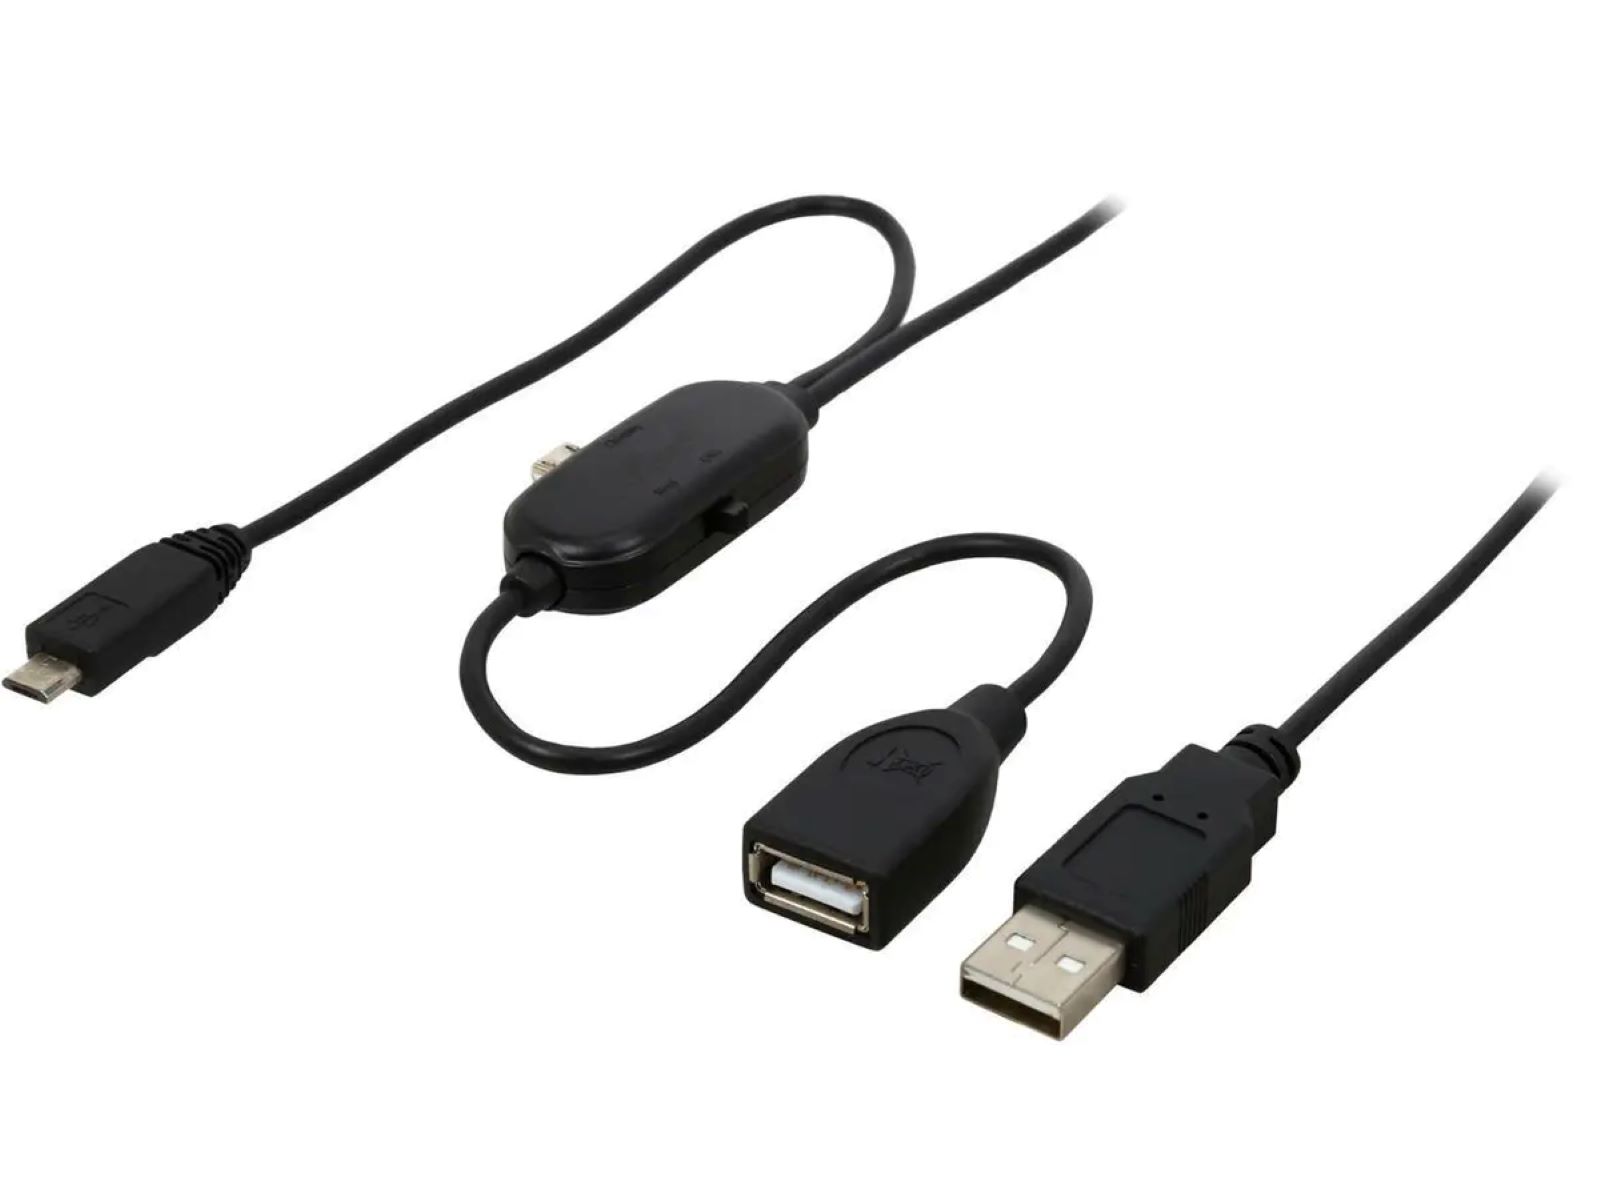 USB On-The-Go Unveiled: Understanding The Purpose Of An OTG Cable